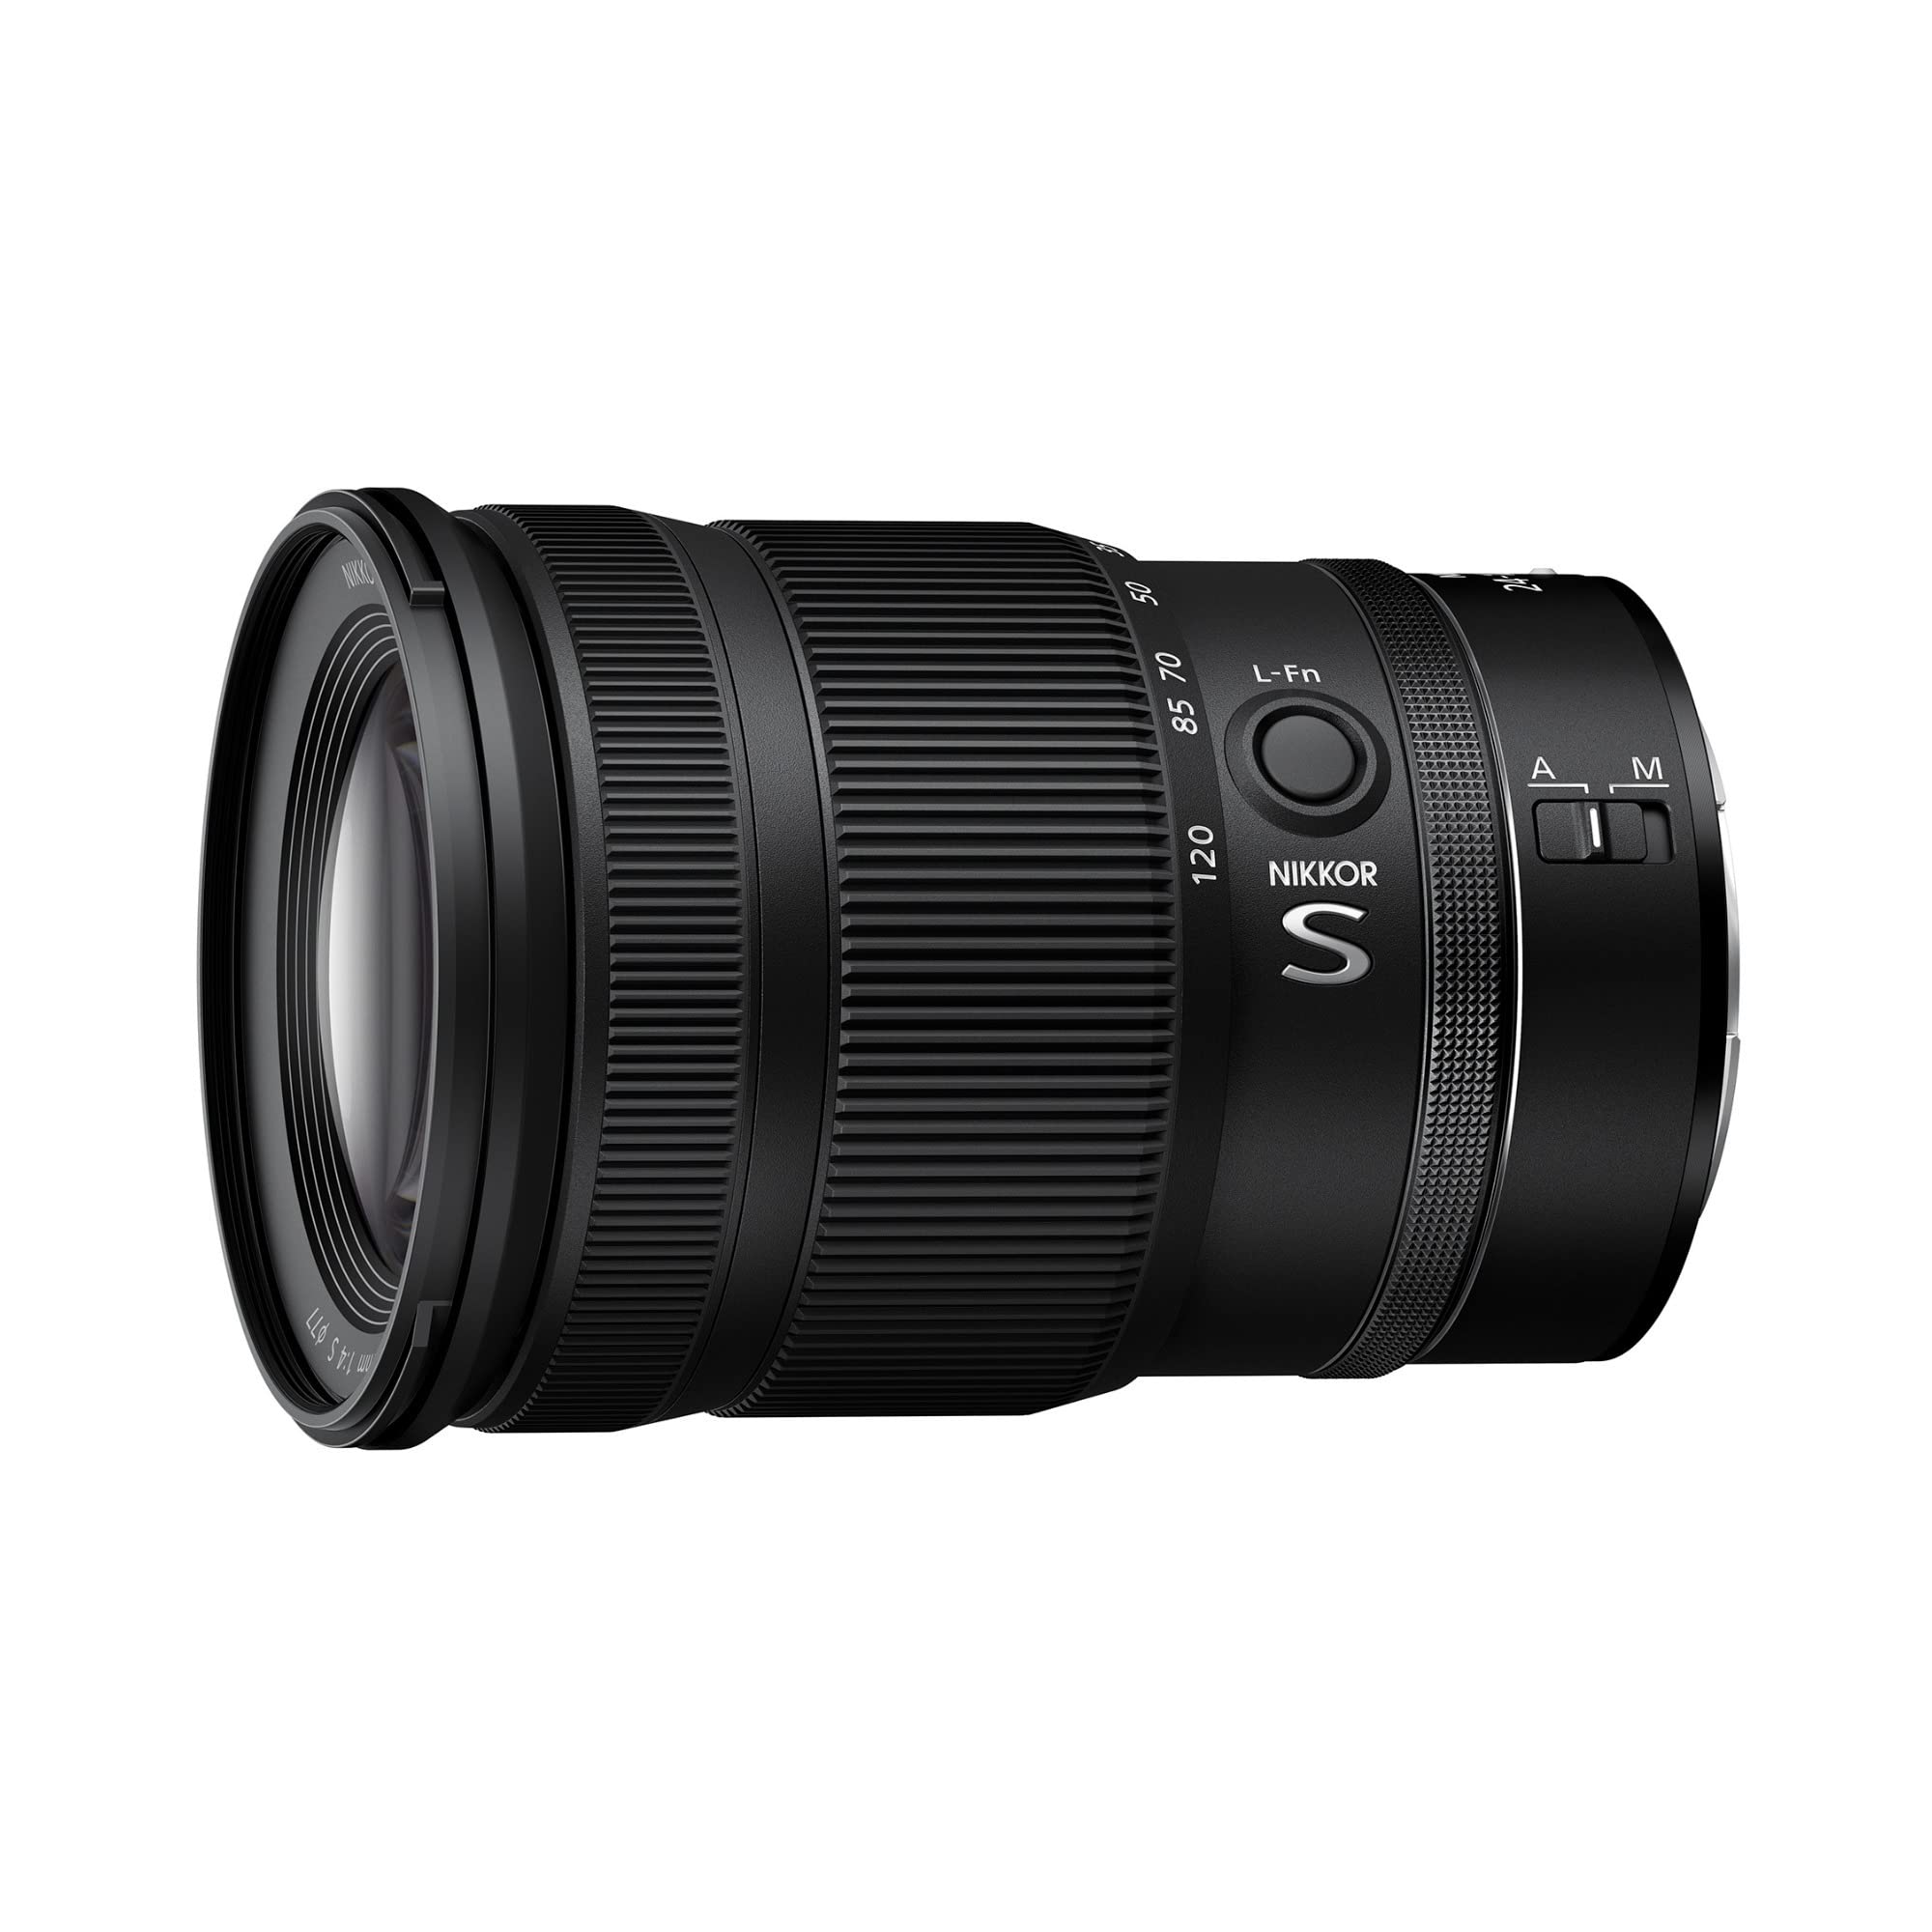 Nikon NIKKOR Z 24-120mm f/4 S | Premium constant aperture all-in-one zoom lens for Z series mirrorless cameras (wide angle to telephoto) | Nikon USA Model - $896.95